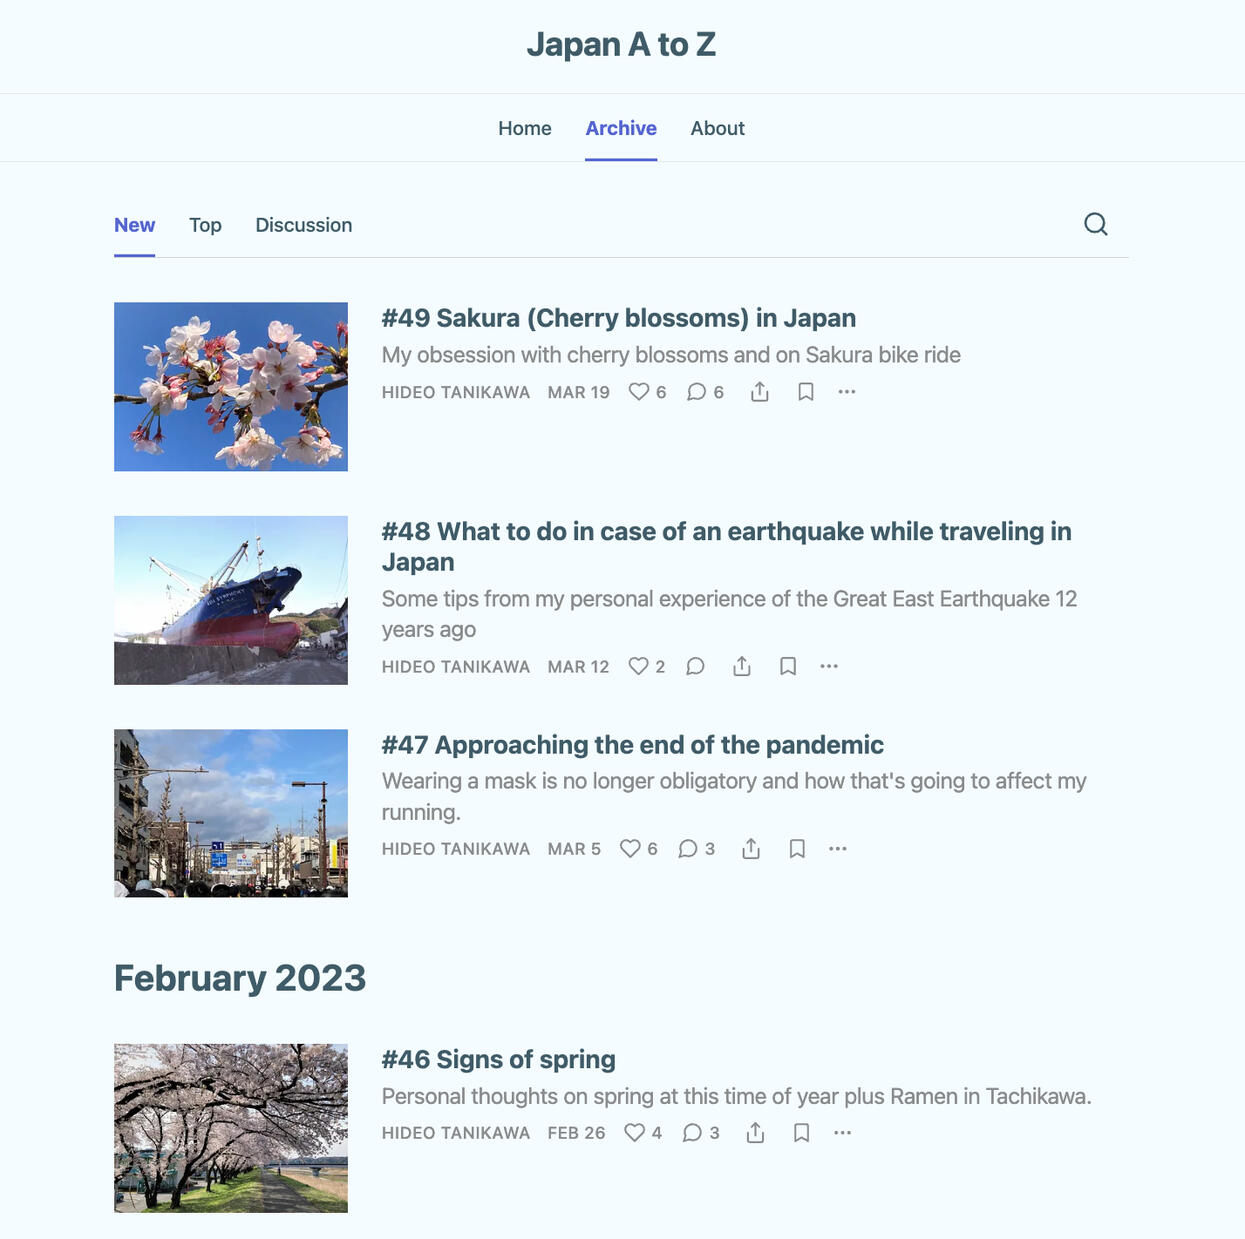 Image of Japan A to Z newsletter archive